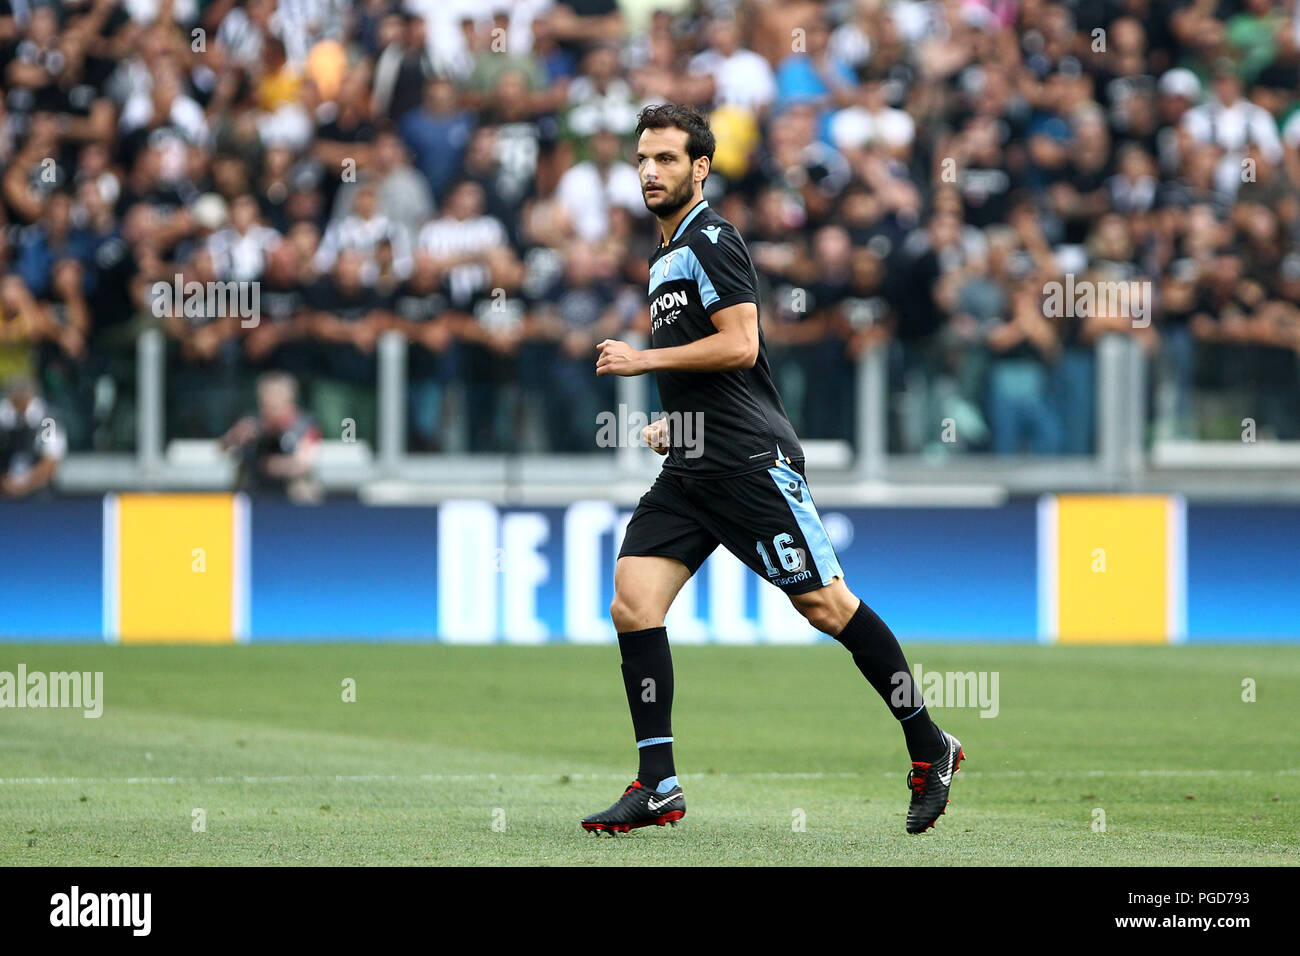 Torino, Italy. 25th August, 2018. Marco Parolo  of SS Lazio in action during the Serie A football match between Juventus Fc and SS Lazio.  Credit: Marco Canoniero / Alamy Live News  . Credit: Marco Canoniero/Alamy Live News Stock Photo